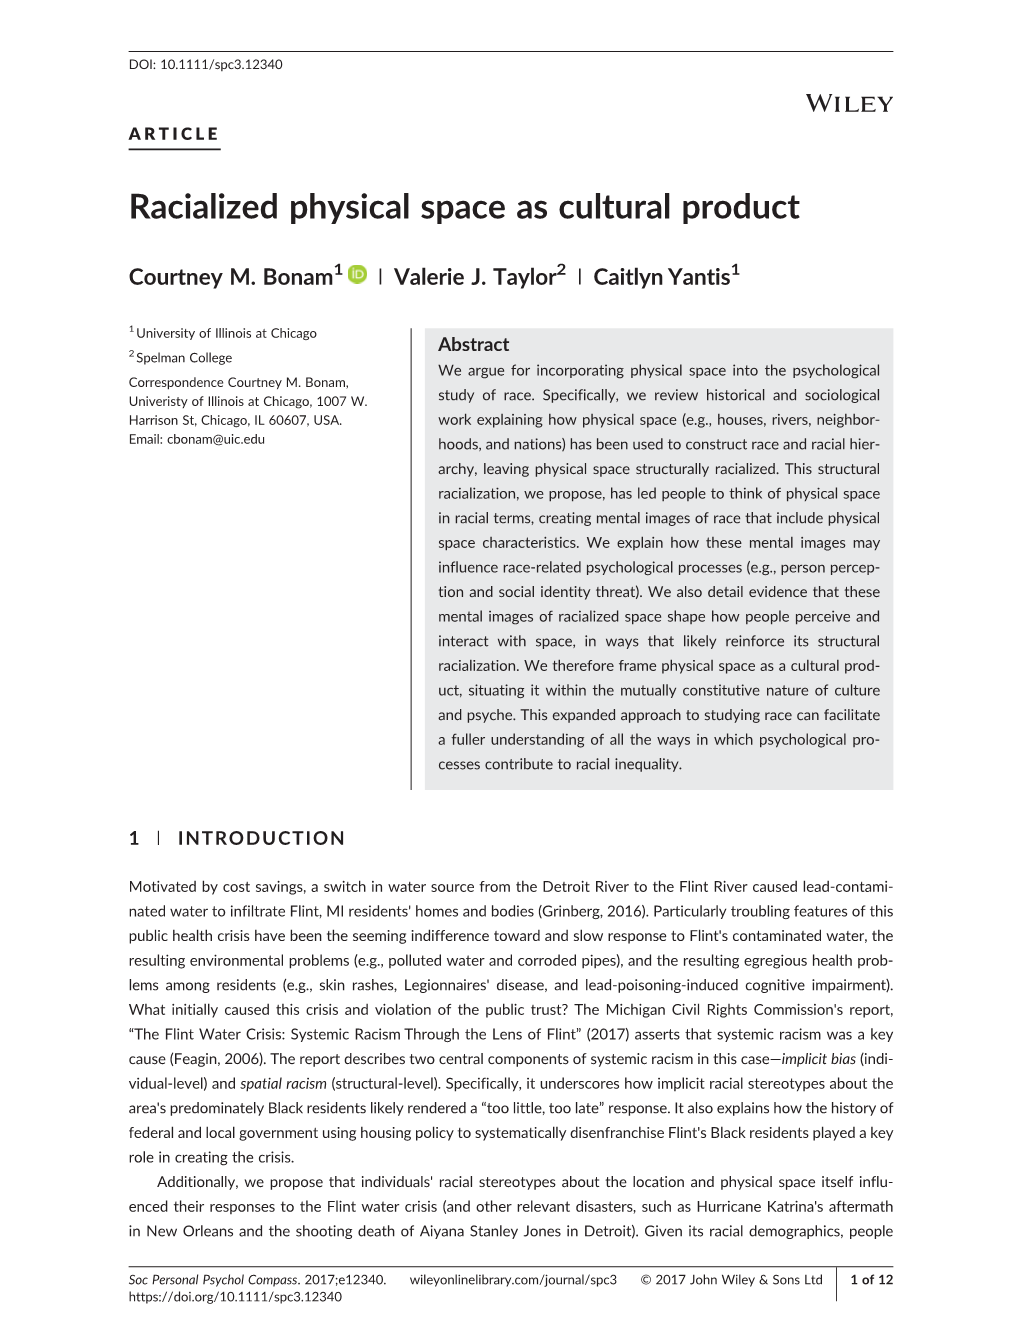 Racialized Physical Space As Cultural Product